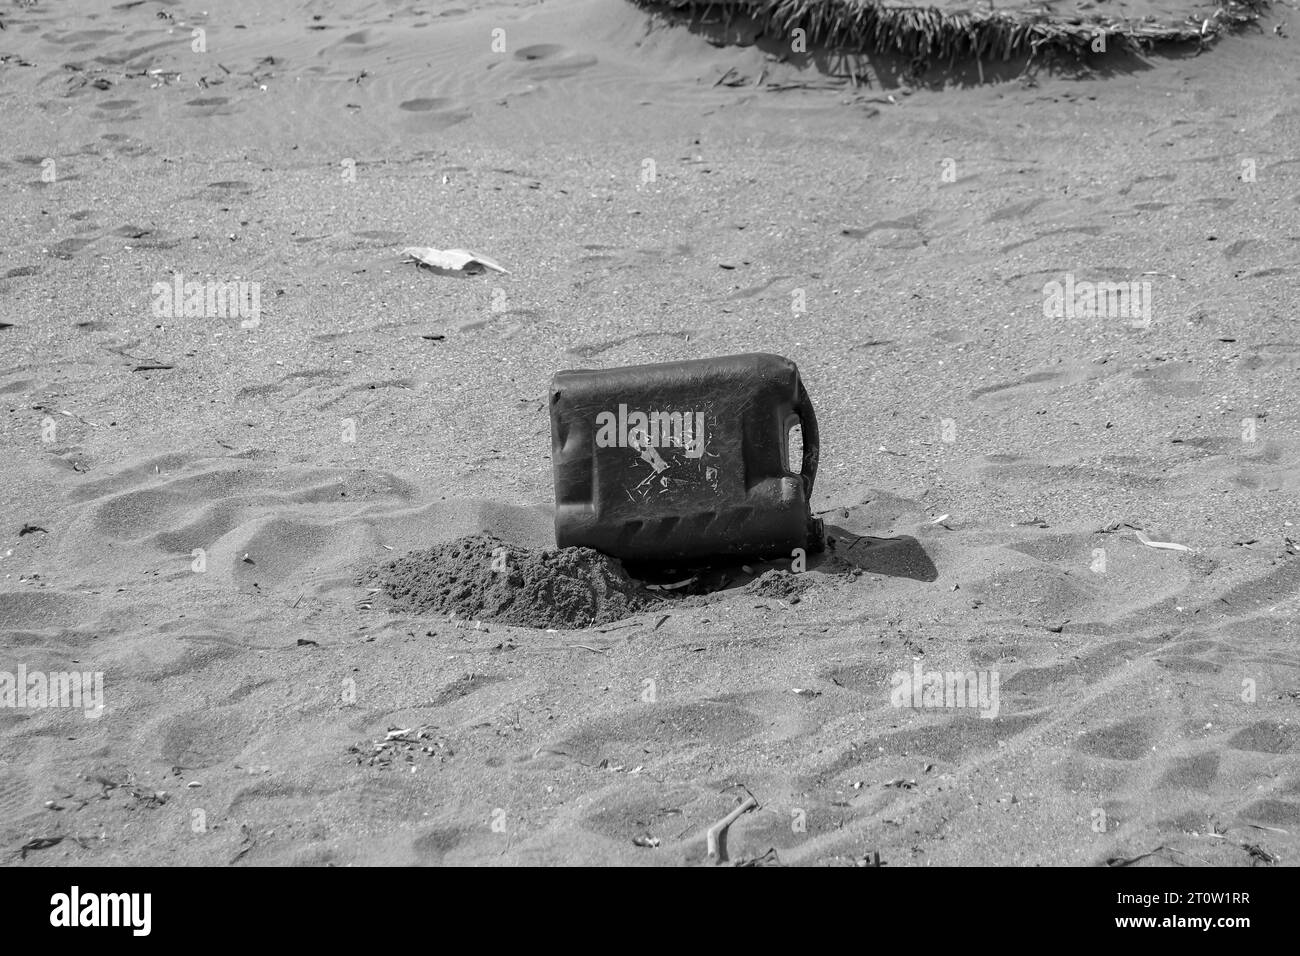 plastic trash thrown on beach sand creating dirt, trash and pollution near the ocean in nature. World environment day, ecological, pollution concept Stock Photo